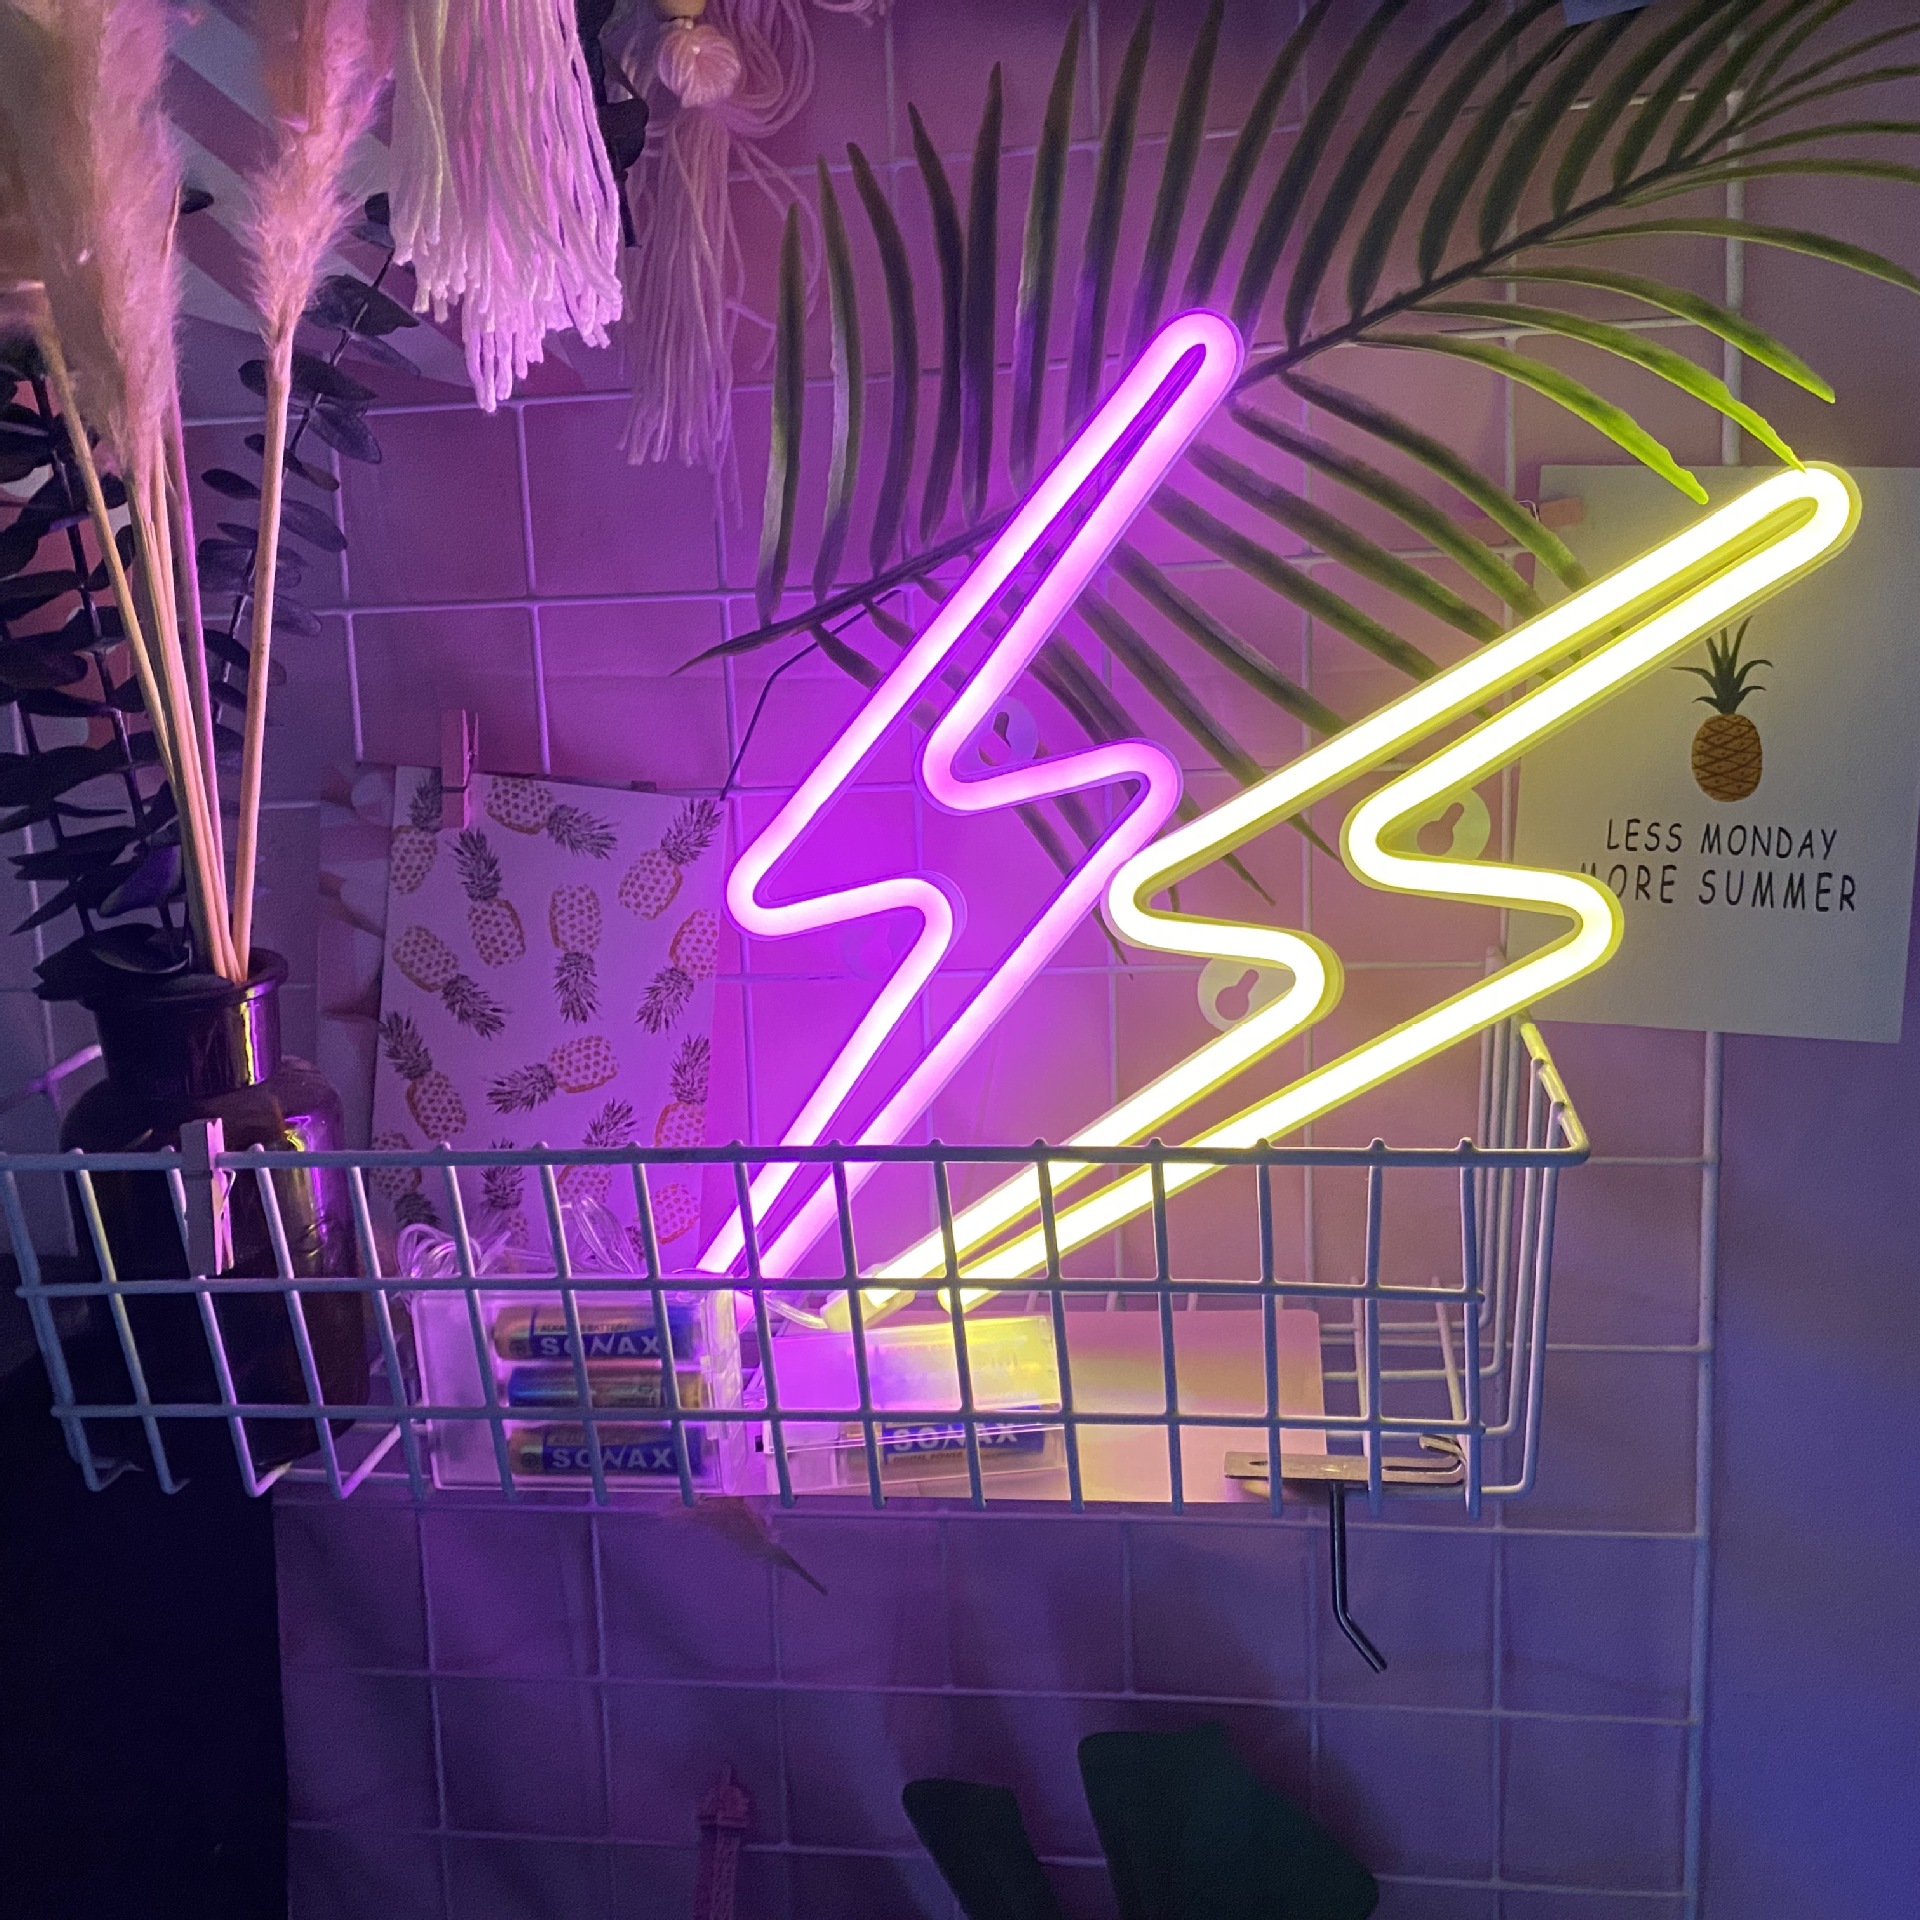 New LED Neon Sign Lightning Shaped USB Battery Operated Night Light Wall Decorative Lamp For Home Party Living Room Xmas Gift